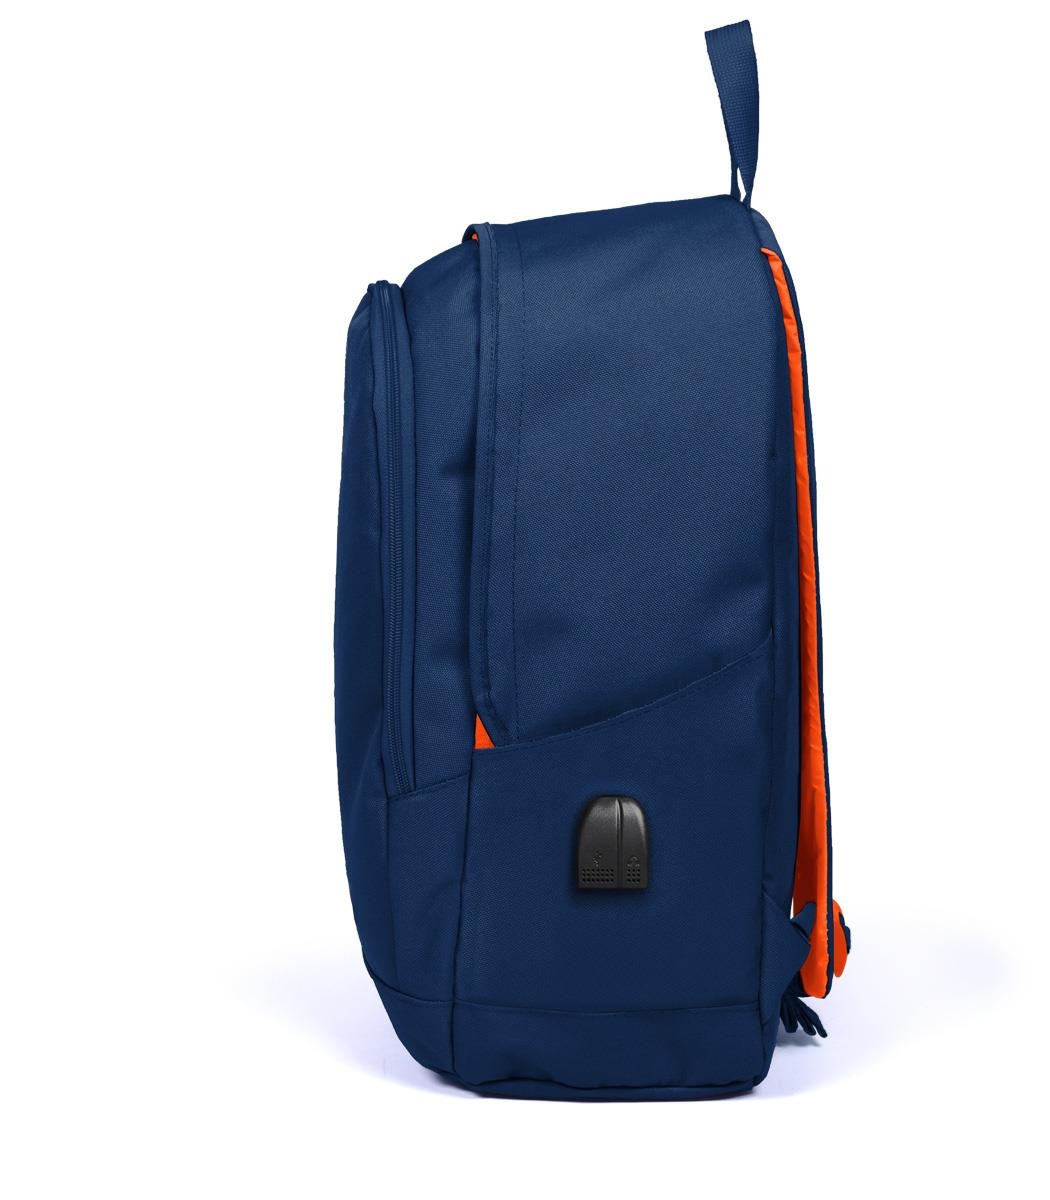 Coral High Sport Three Compartment USB Backpack - Navy Blue Neon Orange